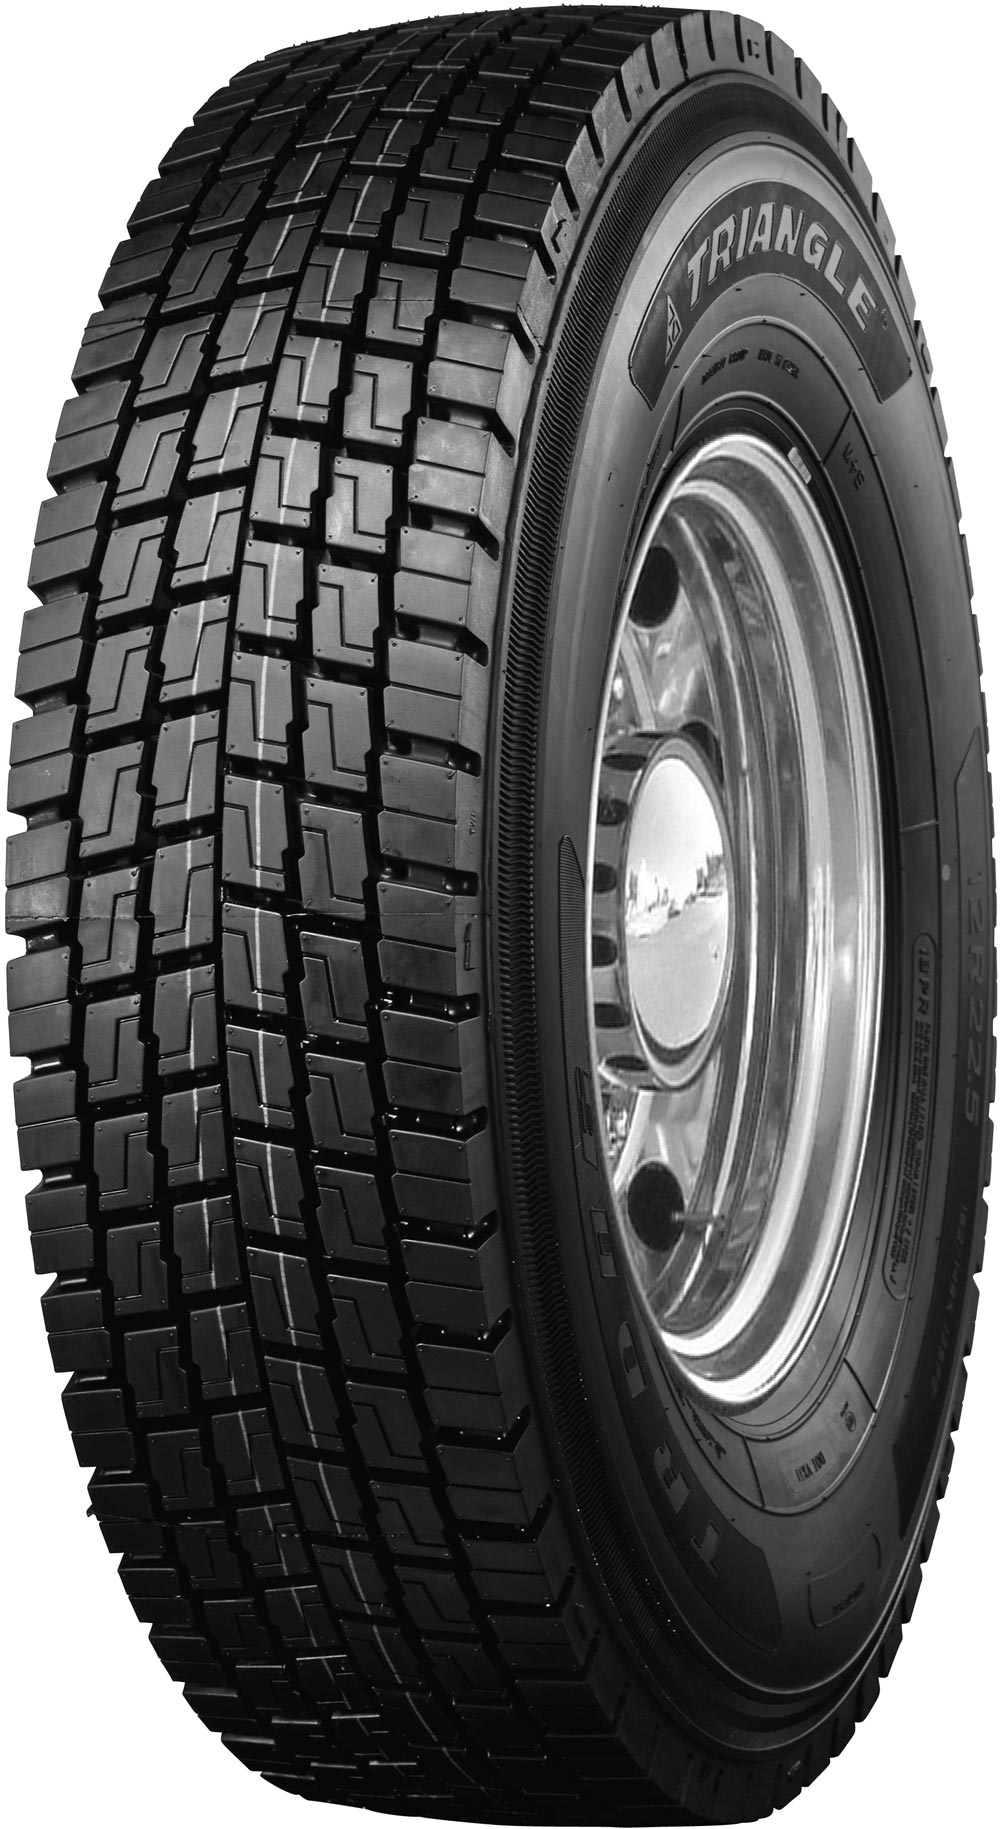 product_type-heavy_tires Triangle TRD06 16PR 275/70 R22.5 145P